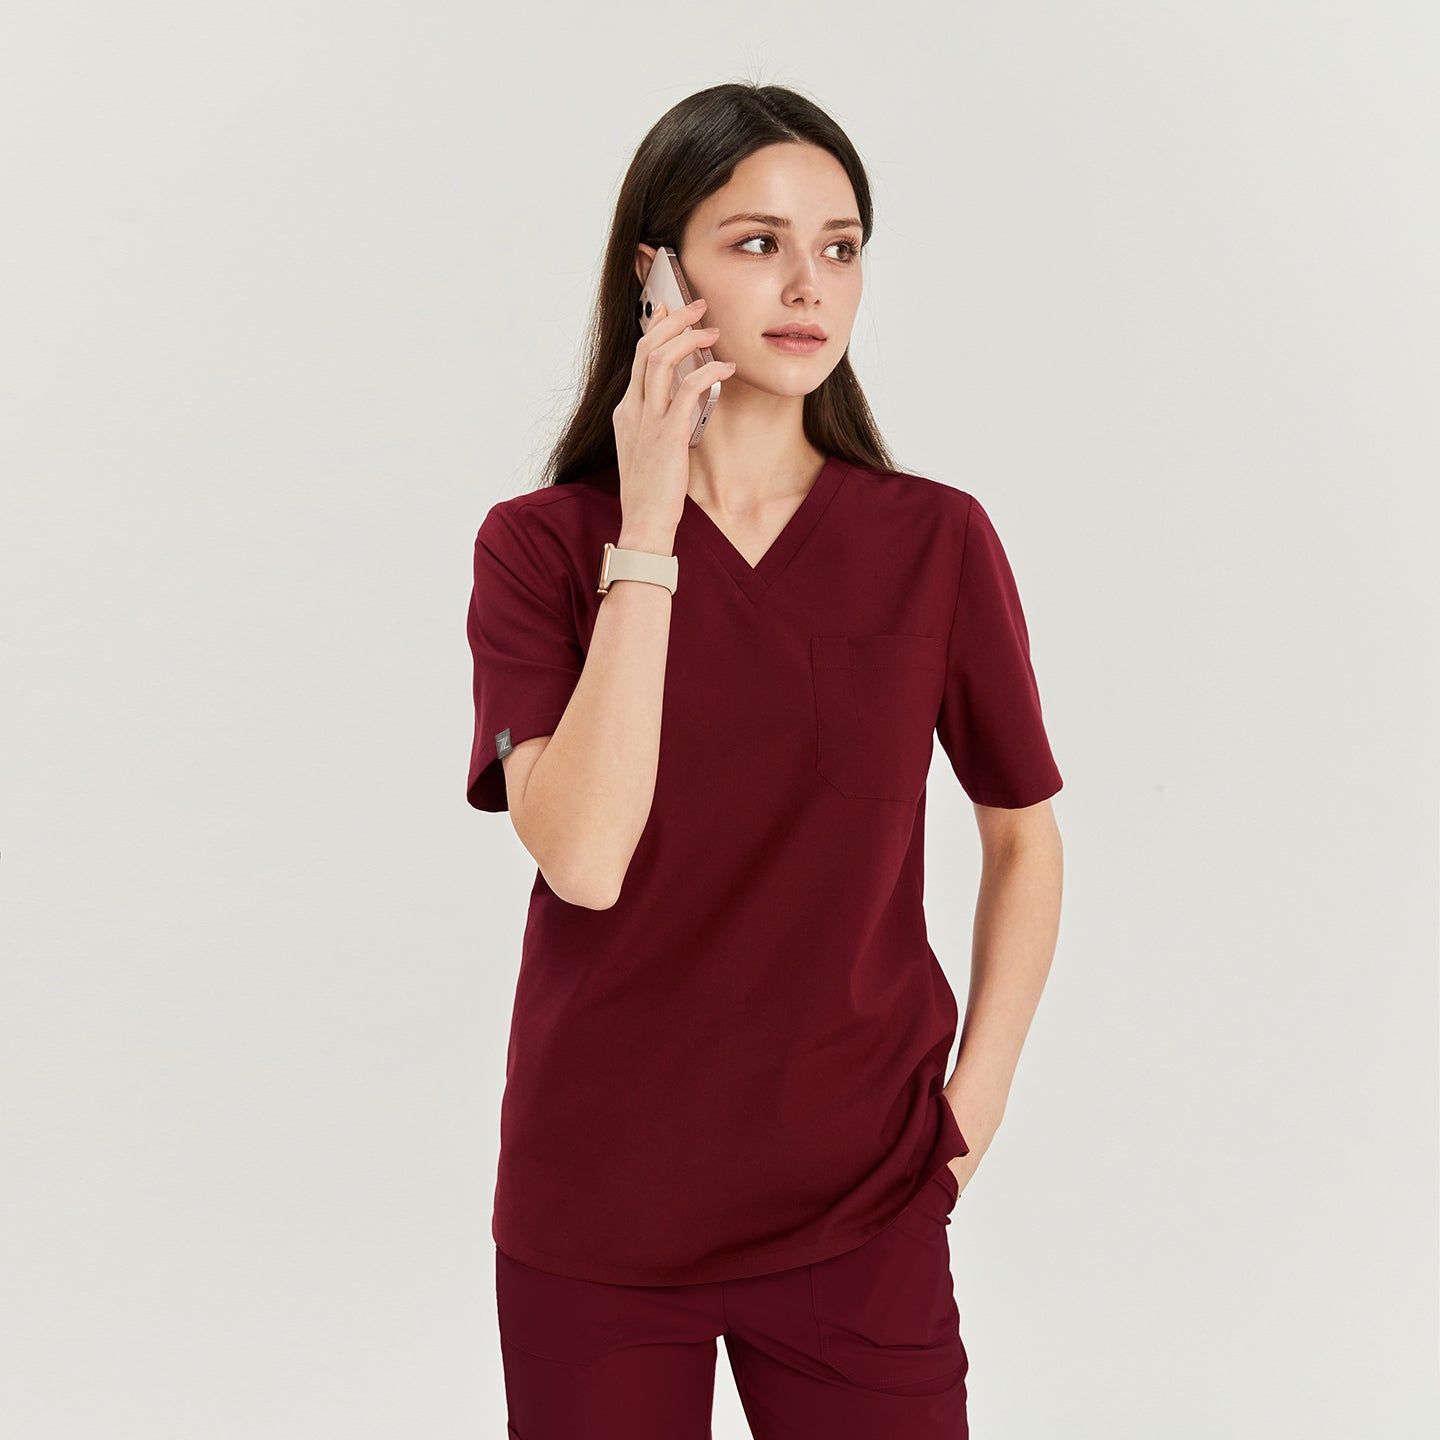  Woman in V-neck scrub top and pants with one hand in pocket, talking on a phone and looking to the side, Burgundy